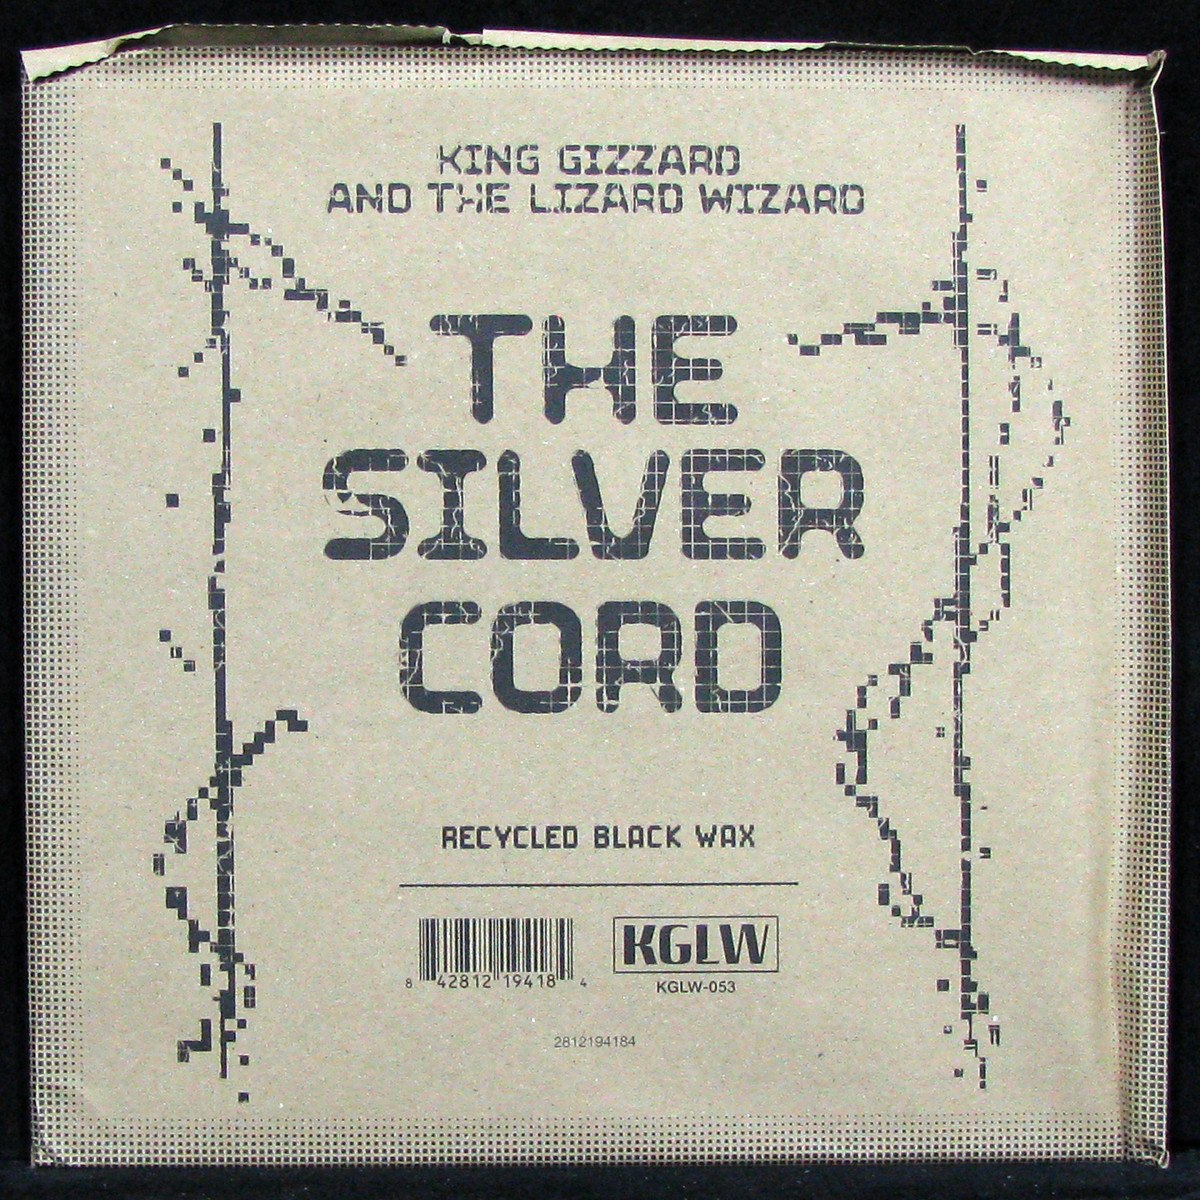 LP King Gizzard And The Lizard Wizard — Silver Cord фото